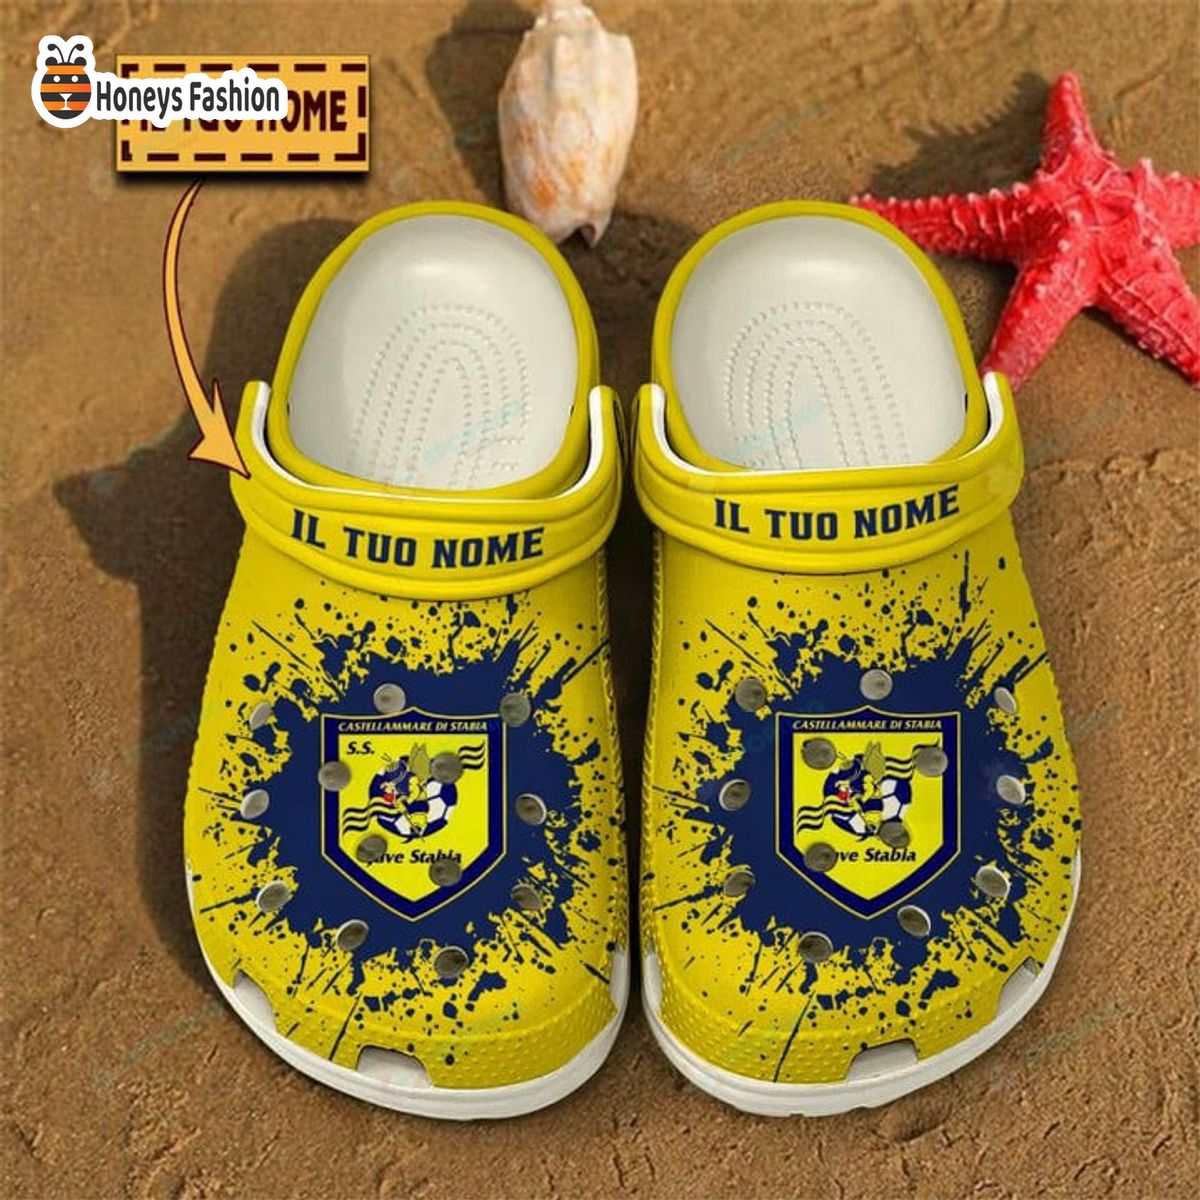 S.S. Juve Stabia personalized classic crocs